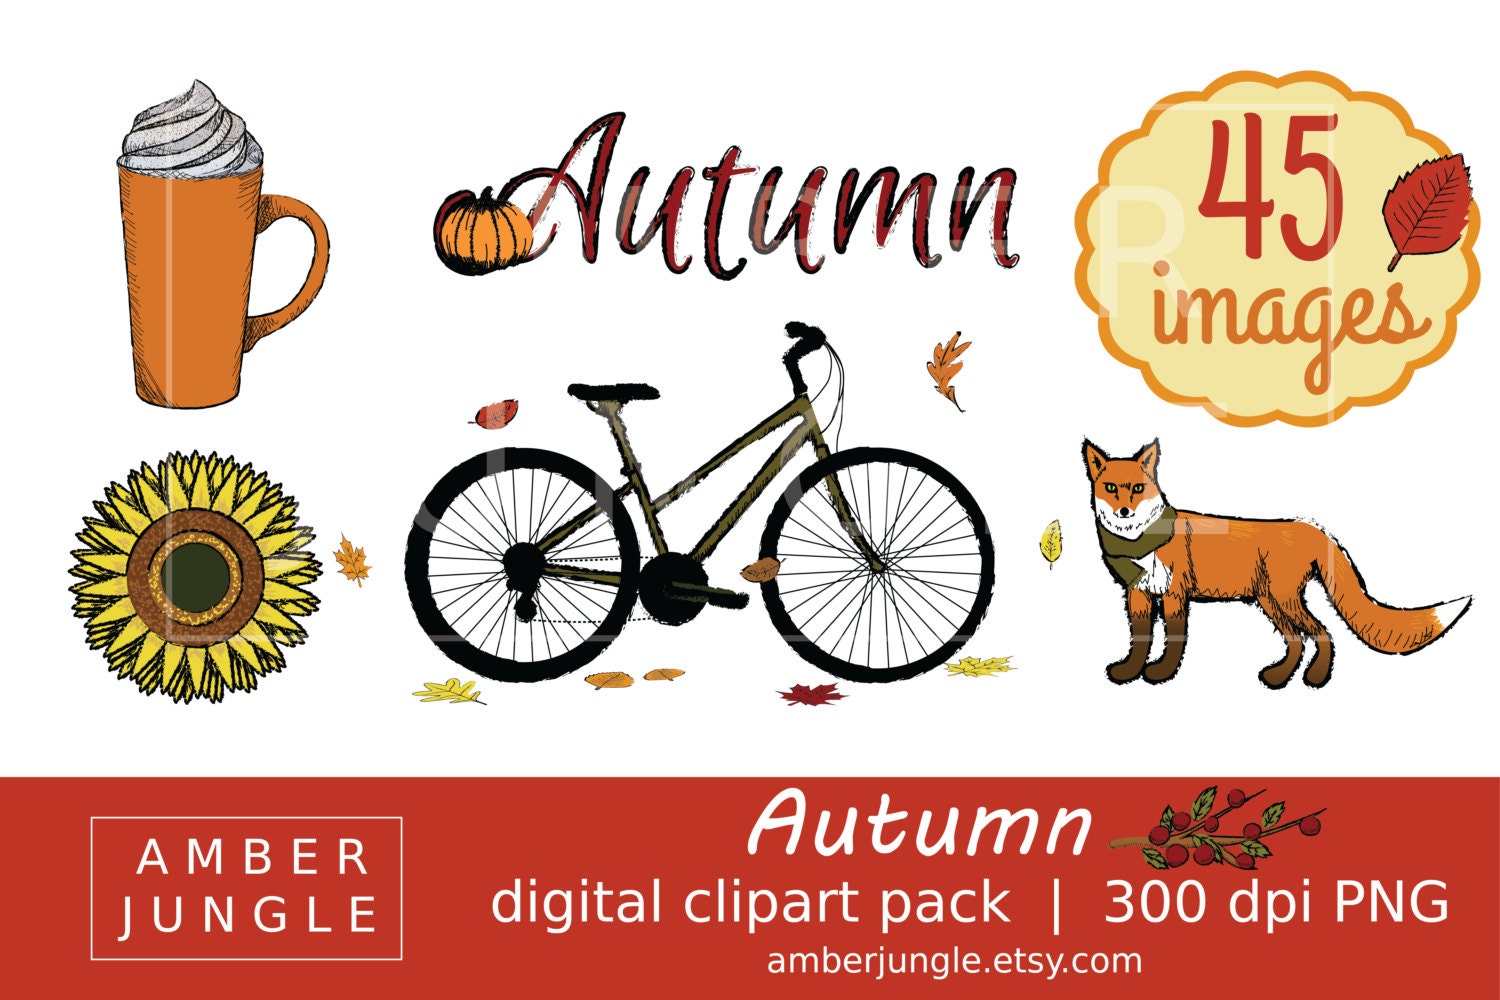 Autumn Clipart - Instant Download! Fall Leaf Harvest Cozy ...